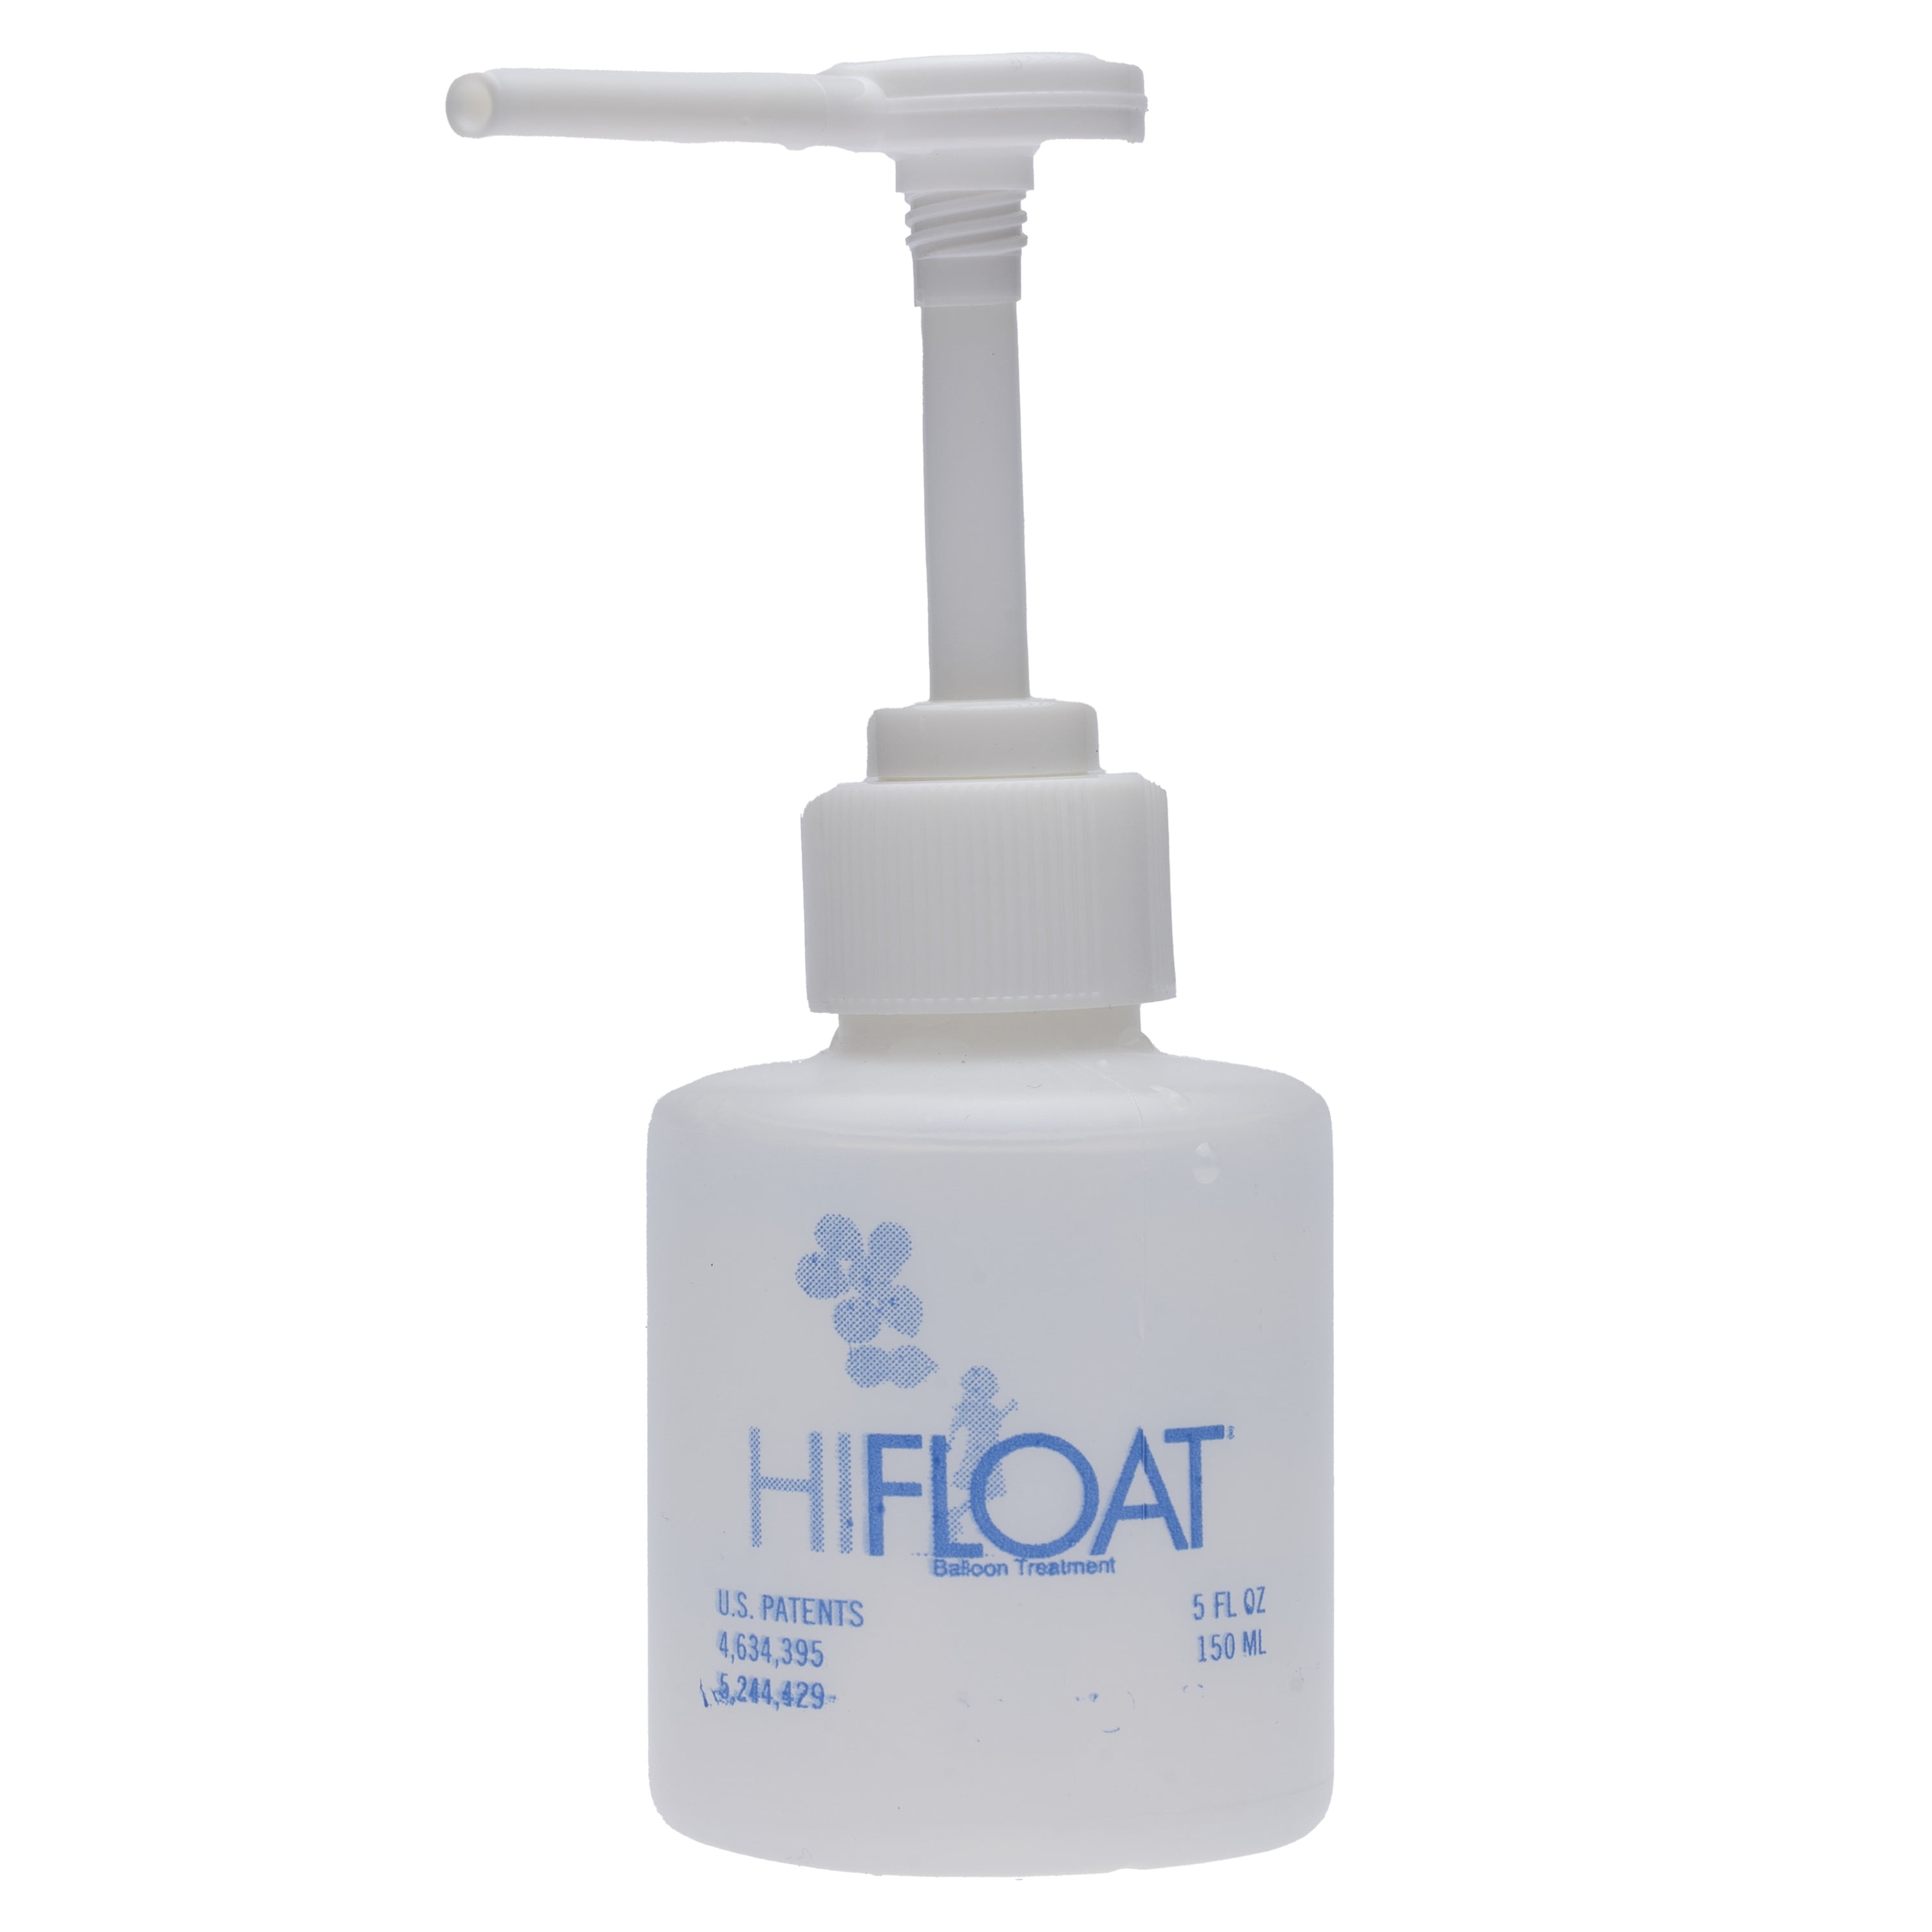 Check out the difference - HI-FLOAT Balloon Treatment